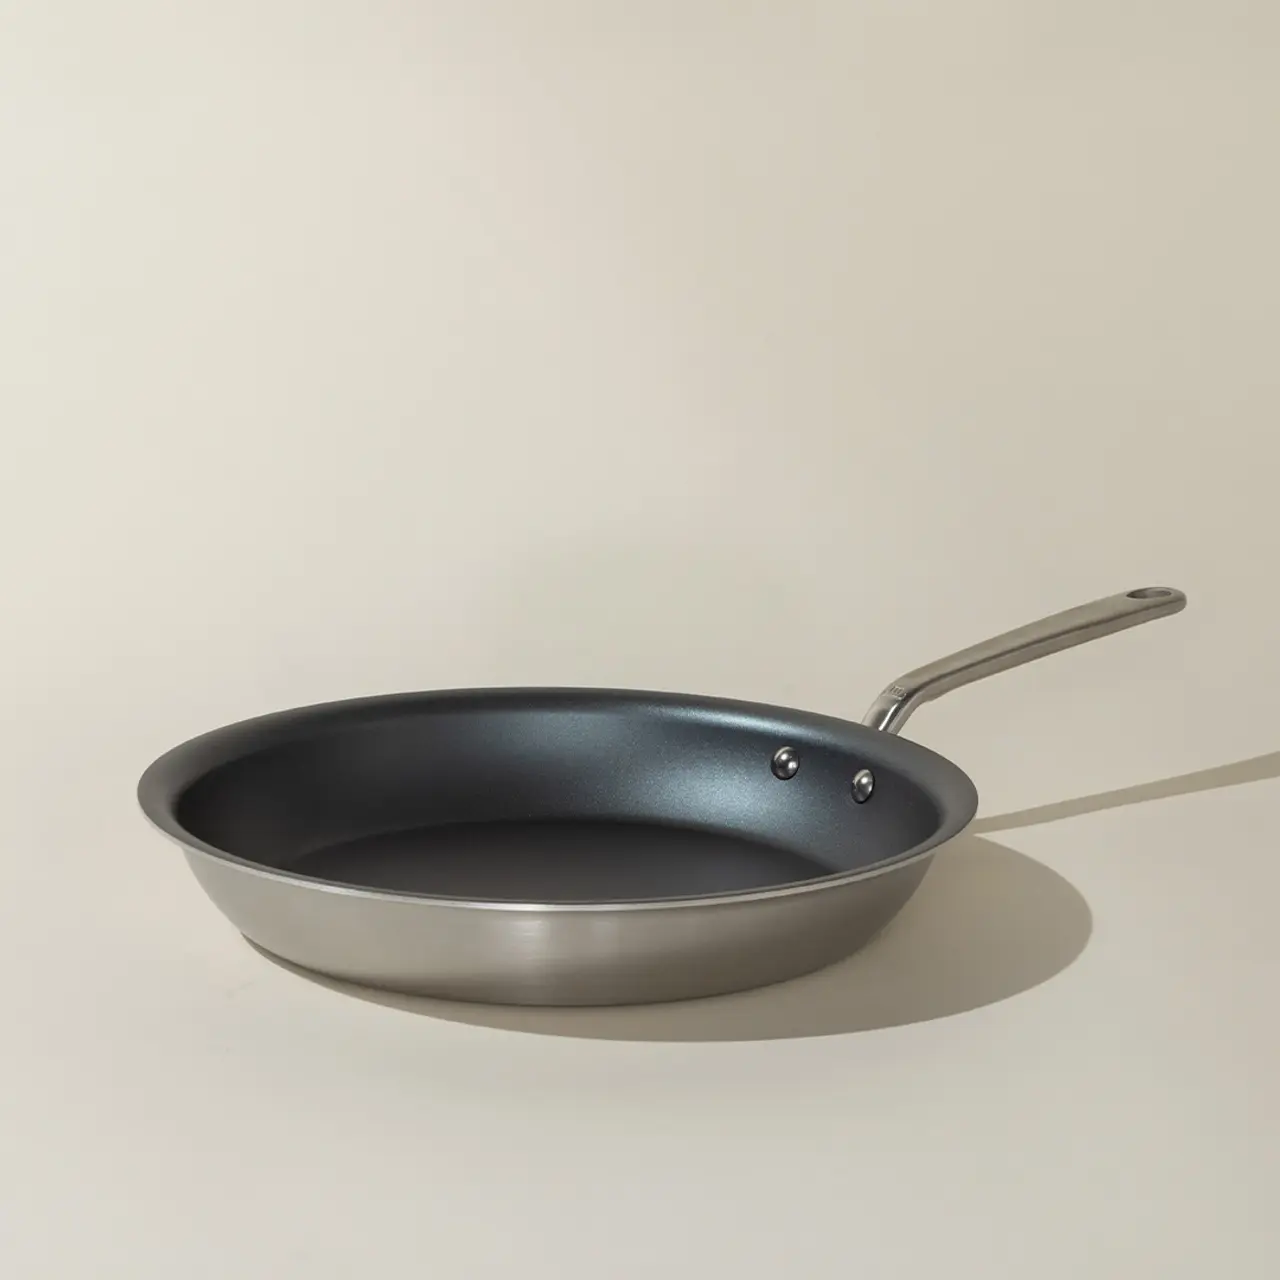 A non-stick frying pan with a silver handle is positioned against a neutral background.